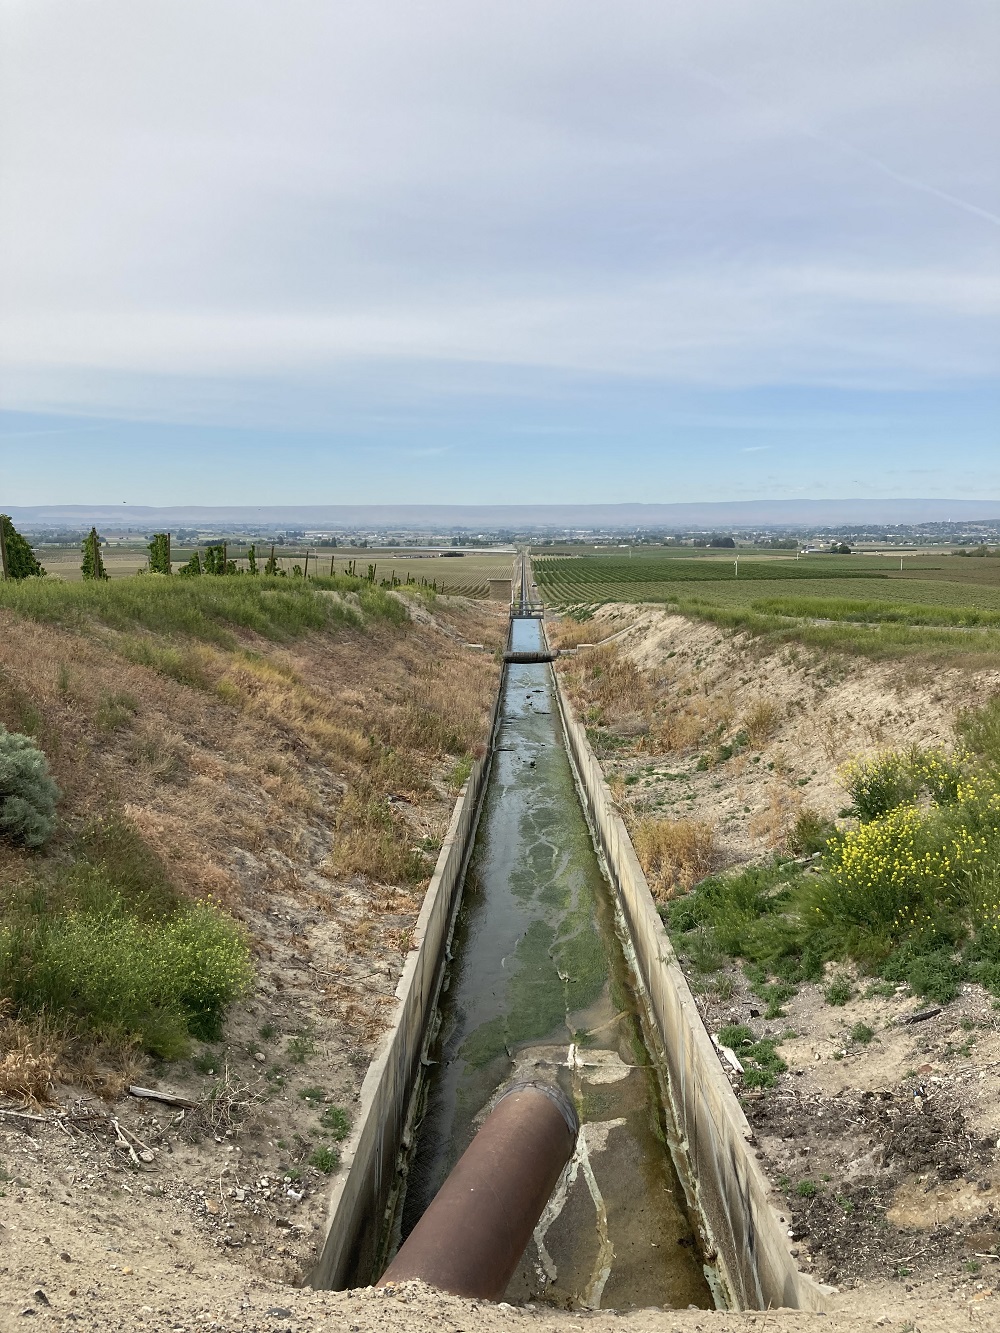  Irrigation canal passing through fields in Roza Irrigation District